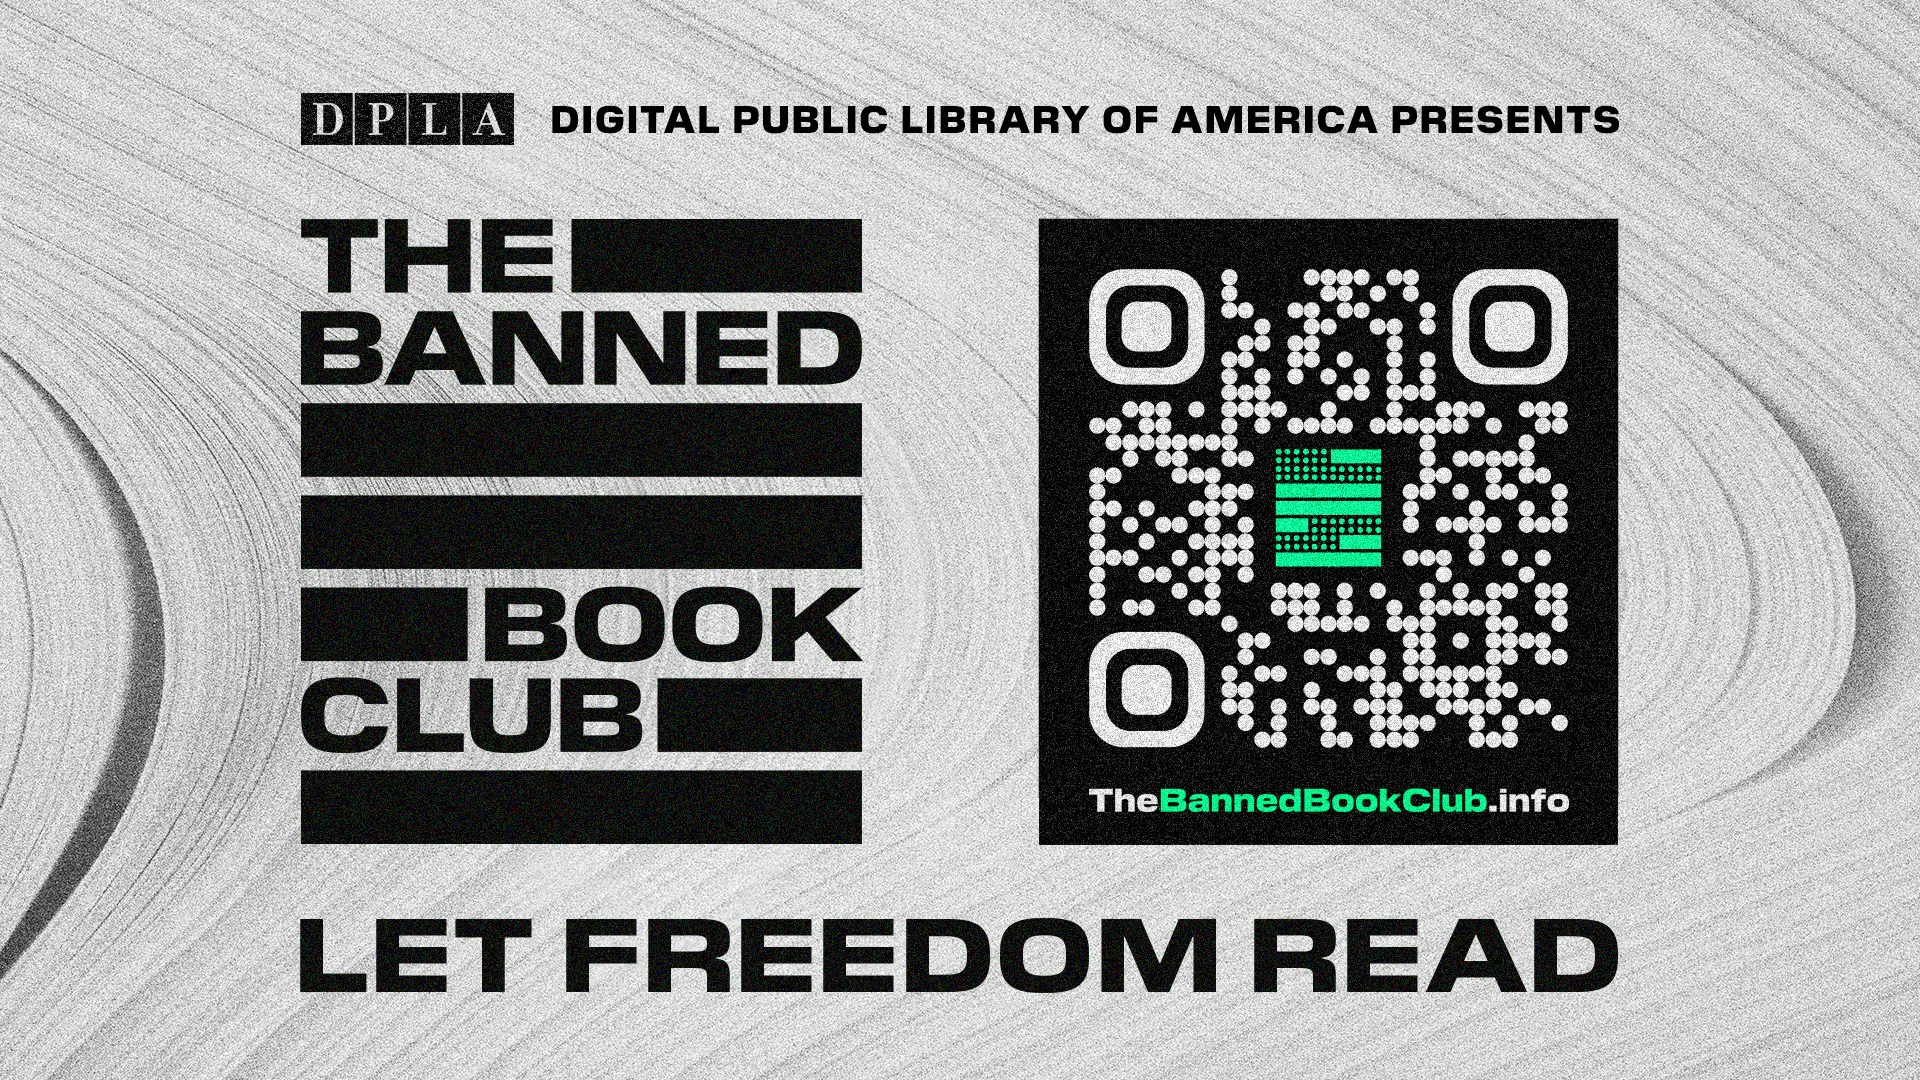 Graphic shows the Banned Book Club wordmark featuring thick lines like redacted text, next to a QR code, and the headline 'Let freedom read'